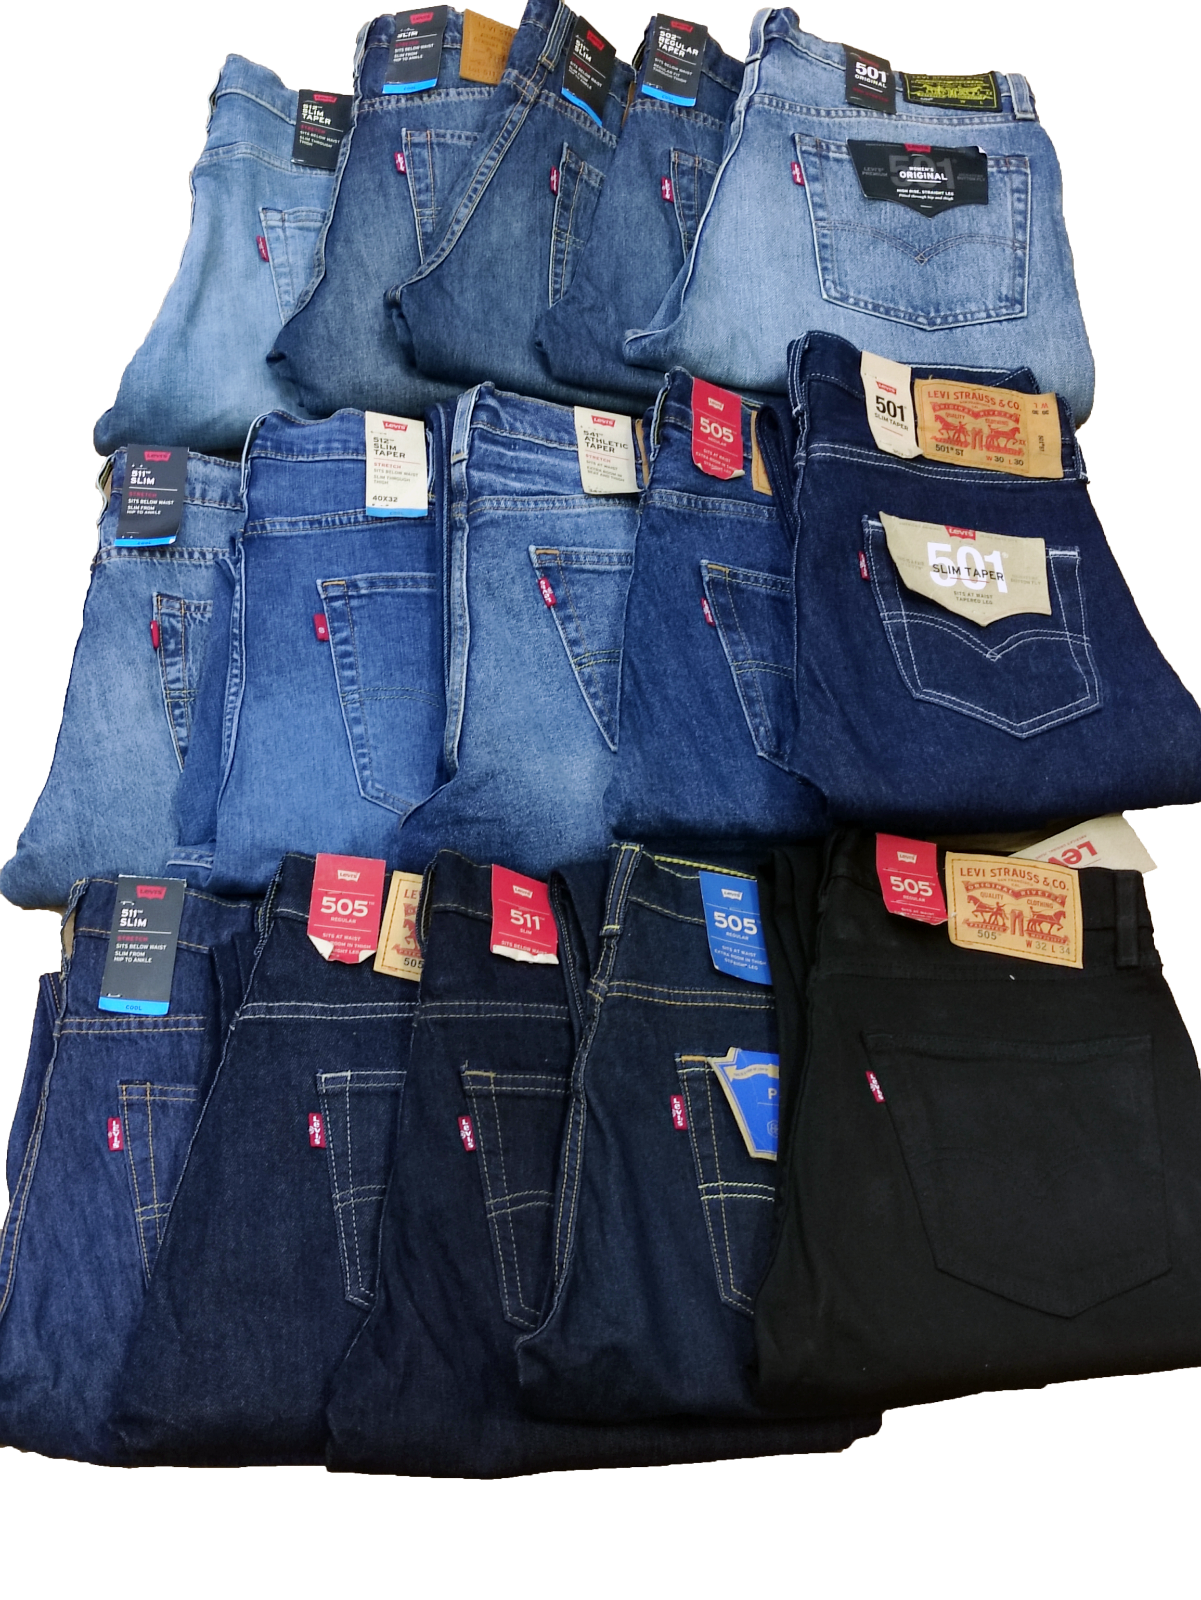 LEVI’S 501 Indianapolis Mall 502 505 511 512 Jeans W2 Department store Vintage Menapos;s 541